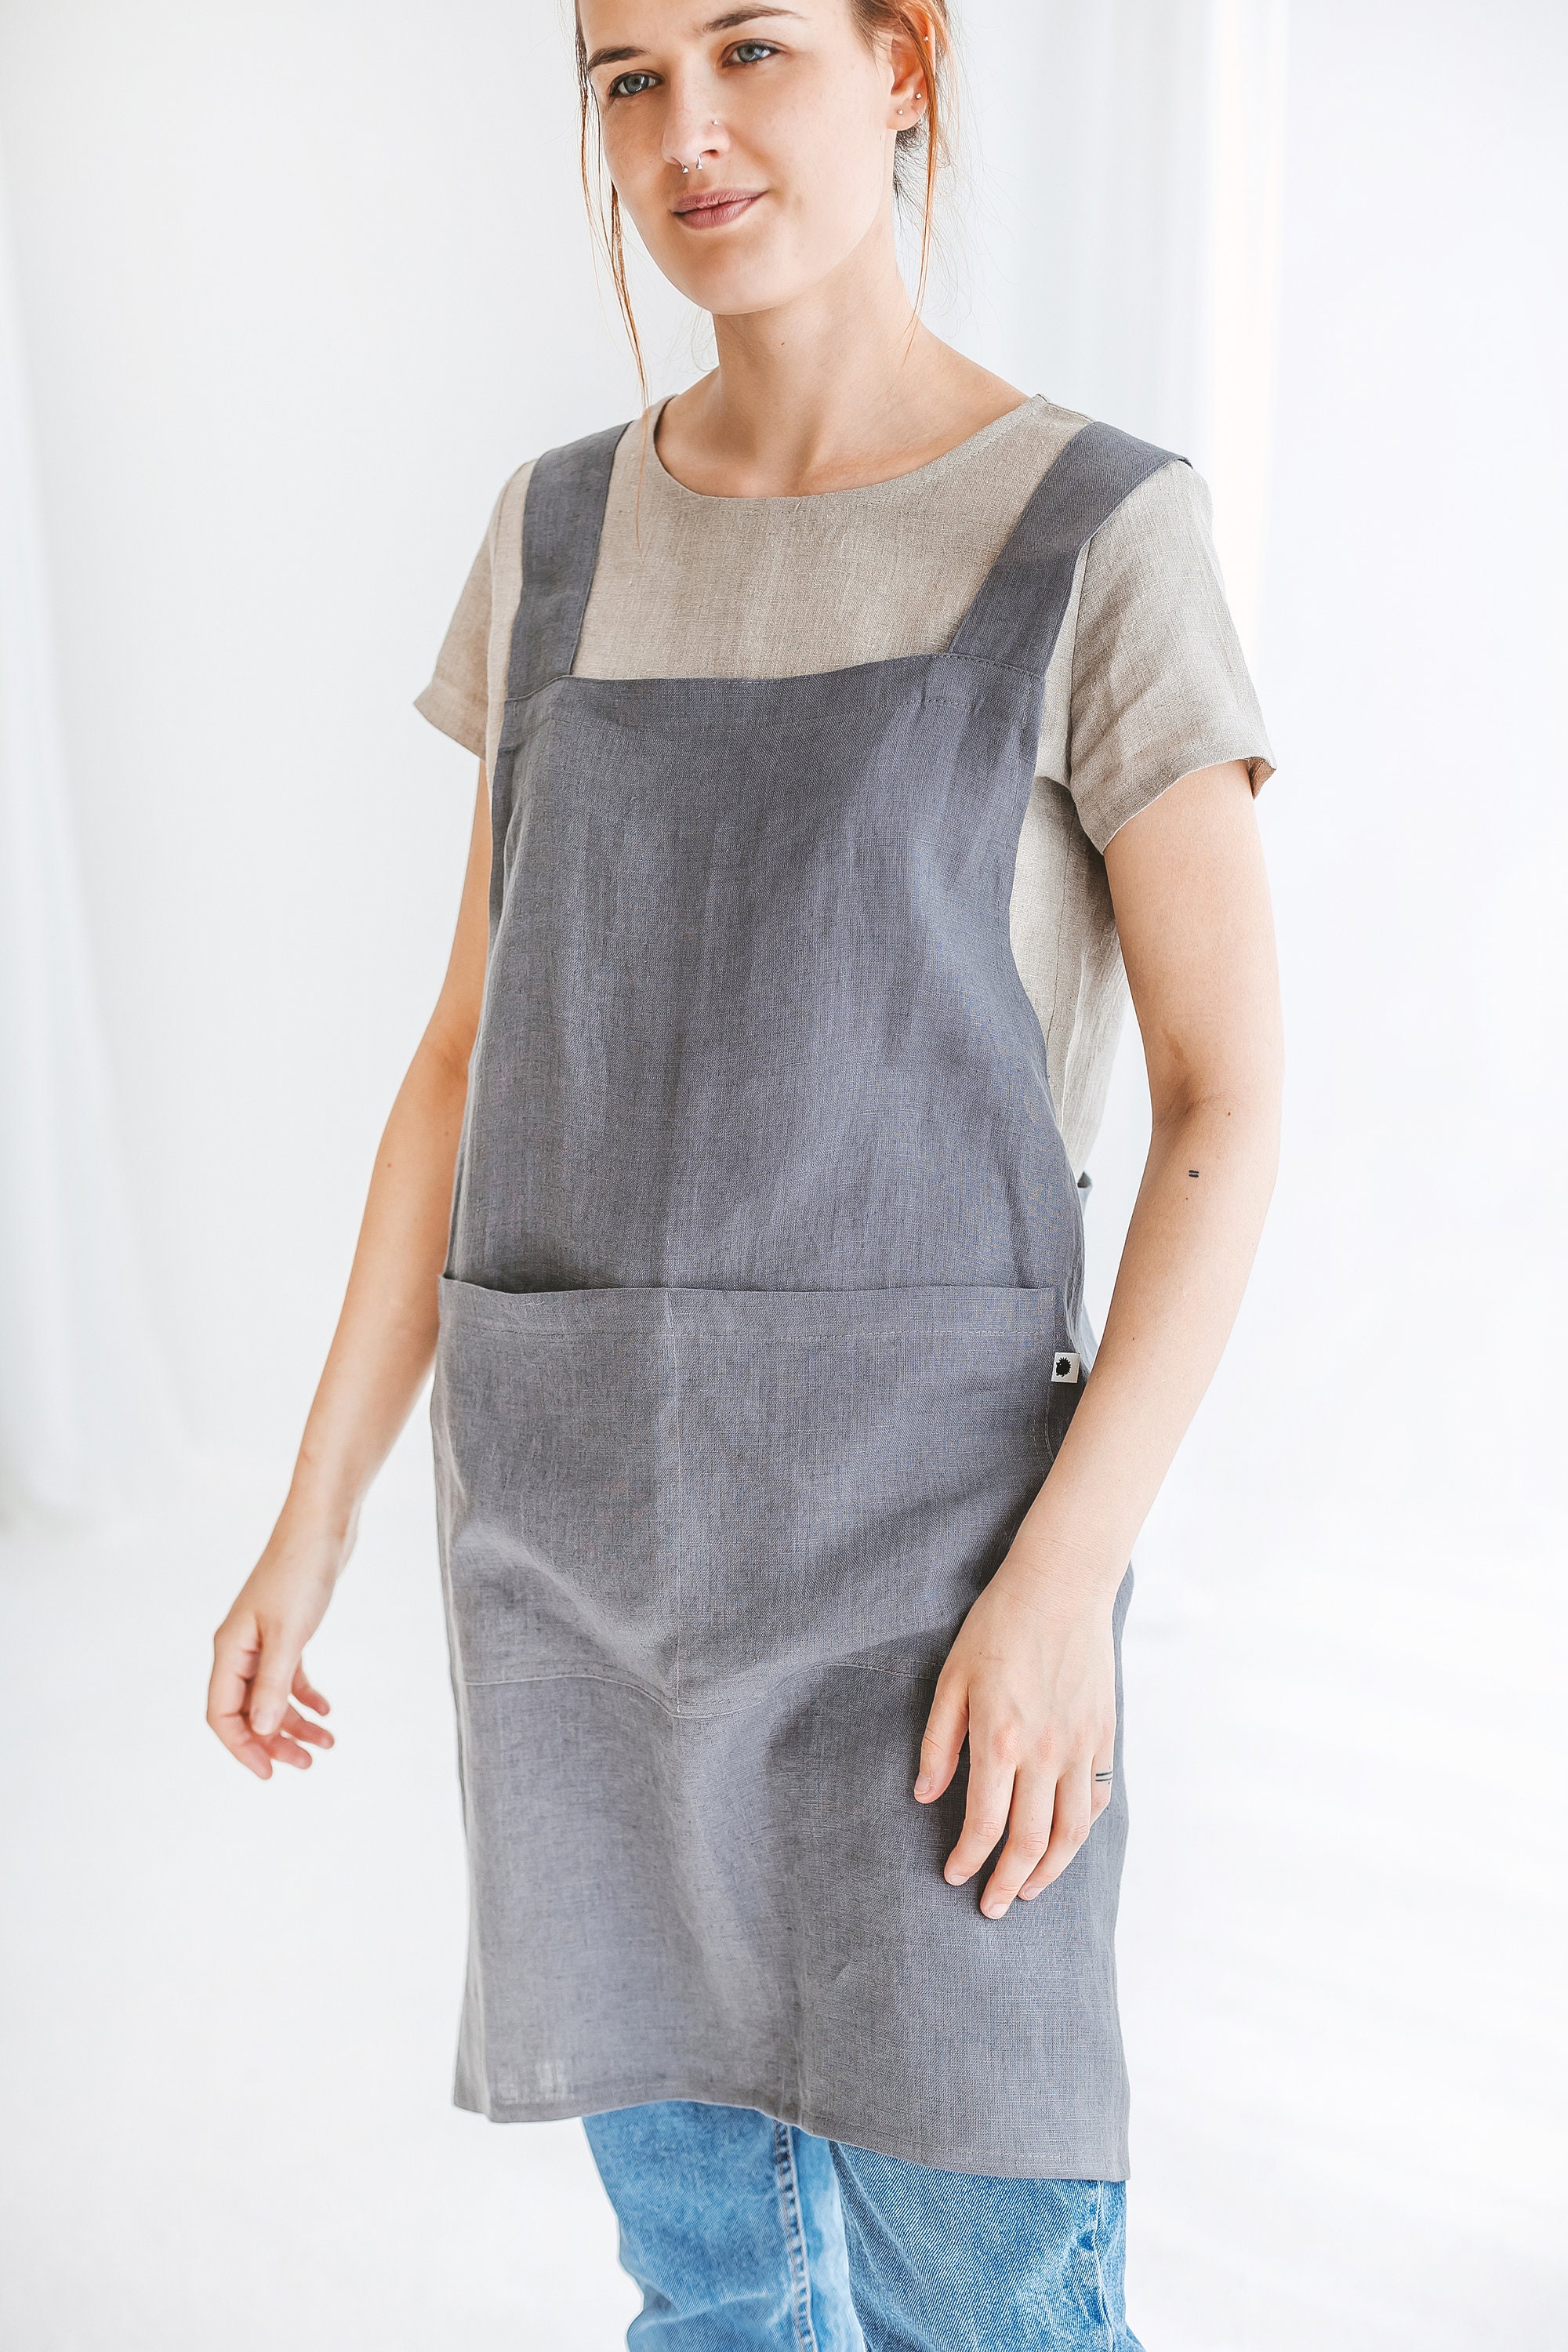 Japanese Cross Back Linen Apron JULIE Pinafore Apron With - Etsy